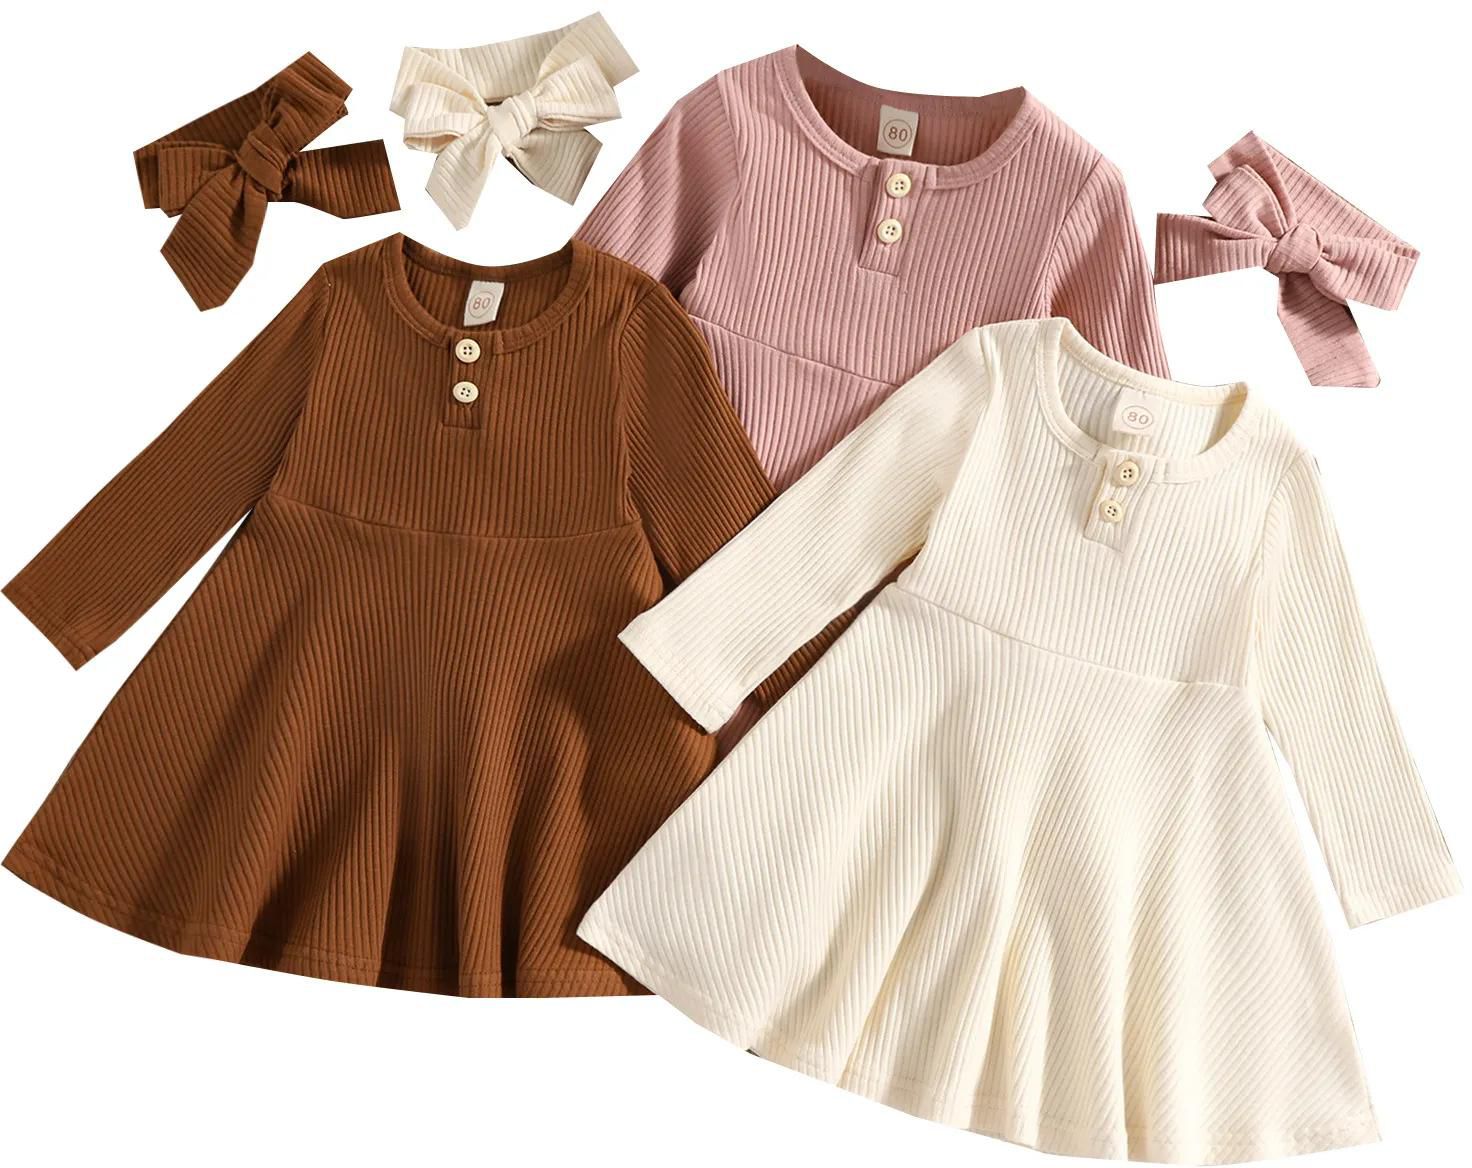  6M-4Y Infant Toddler Kids Baby Girls Dress Soft Knitted Long Sleeve Button Dresses For Girls Autumn Spring Clothing 